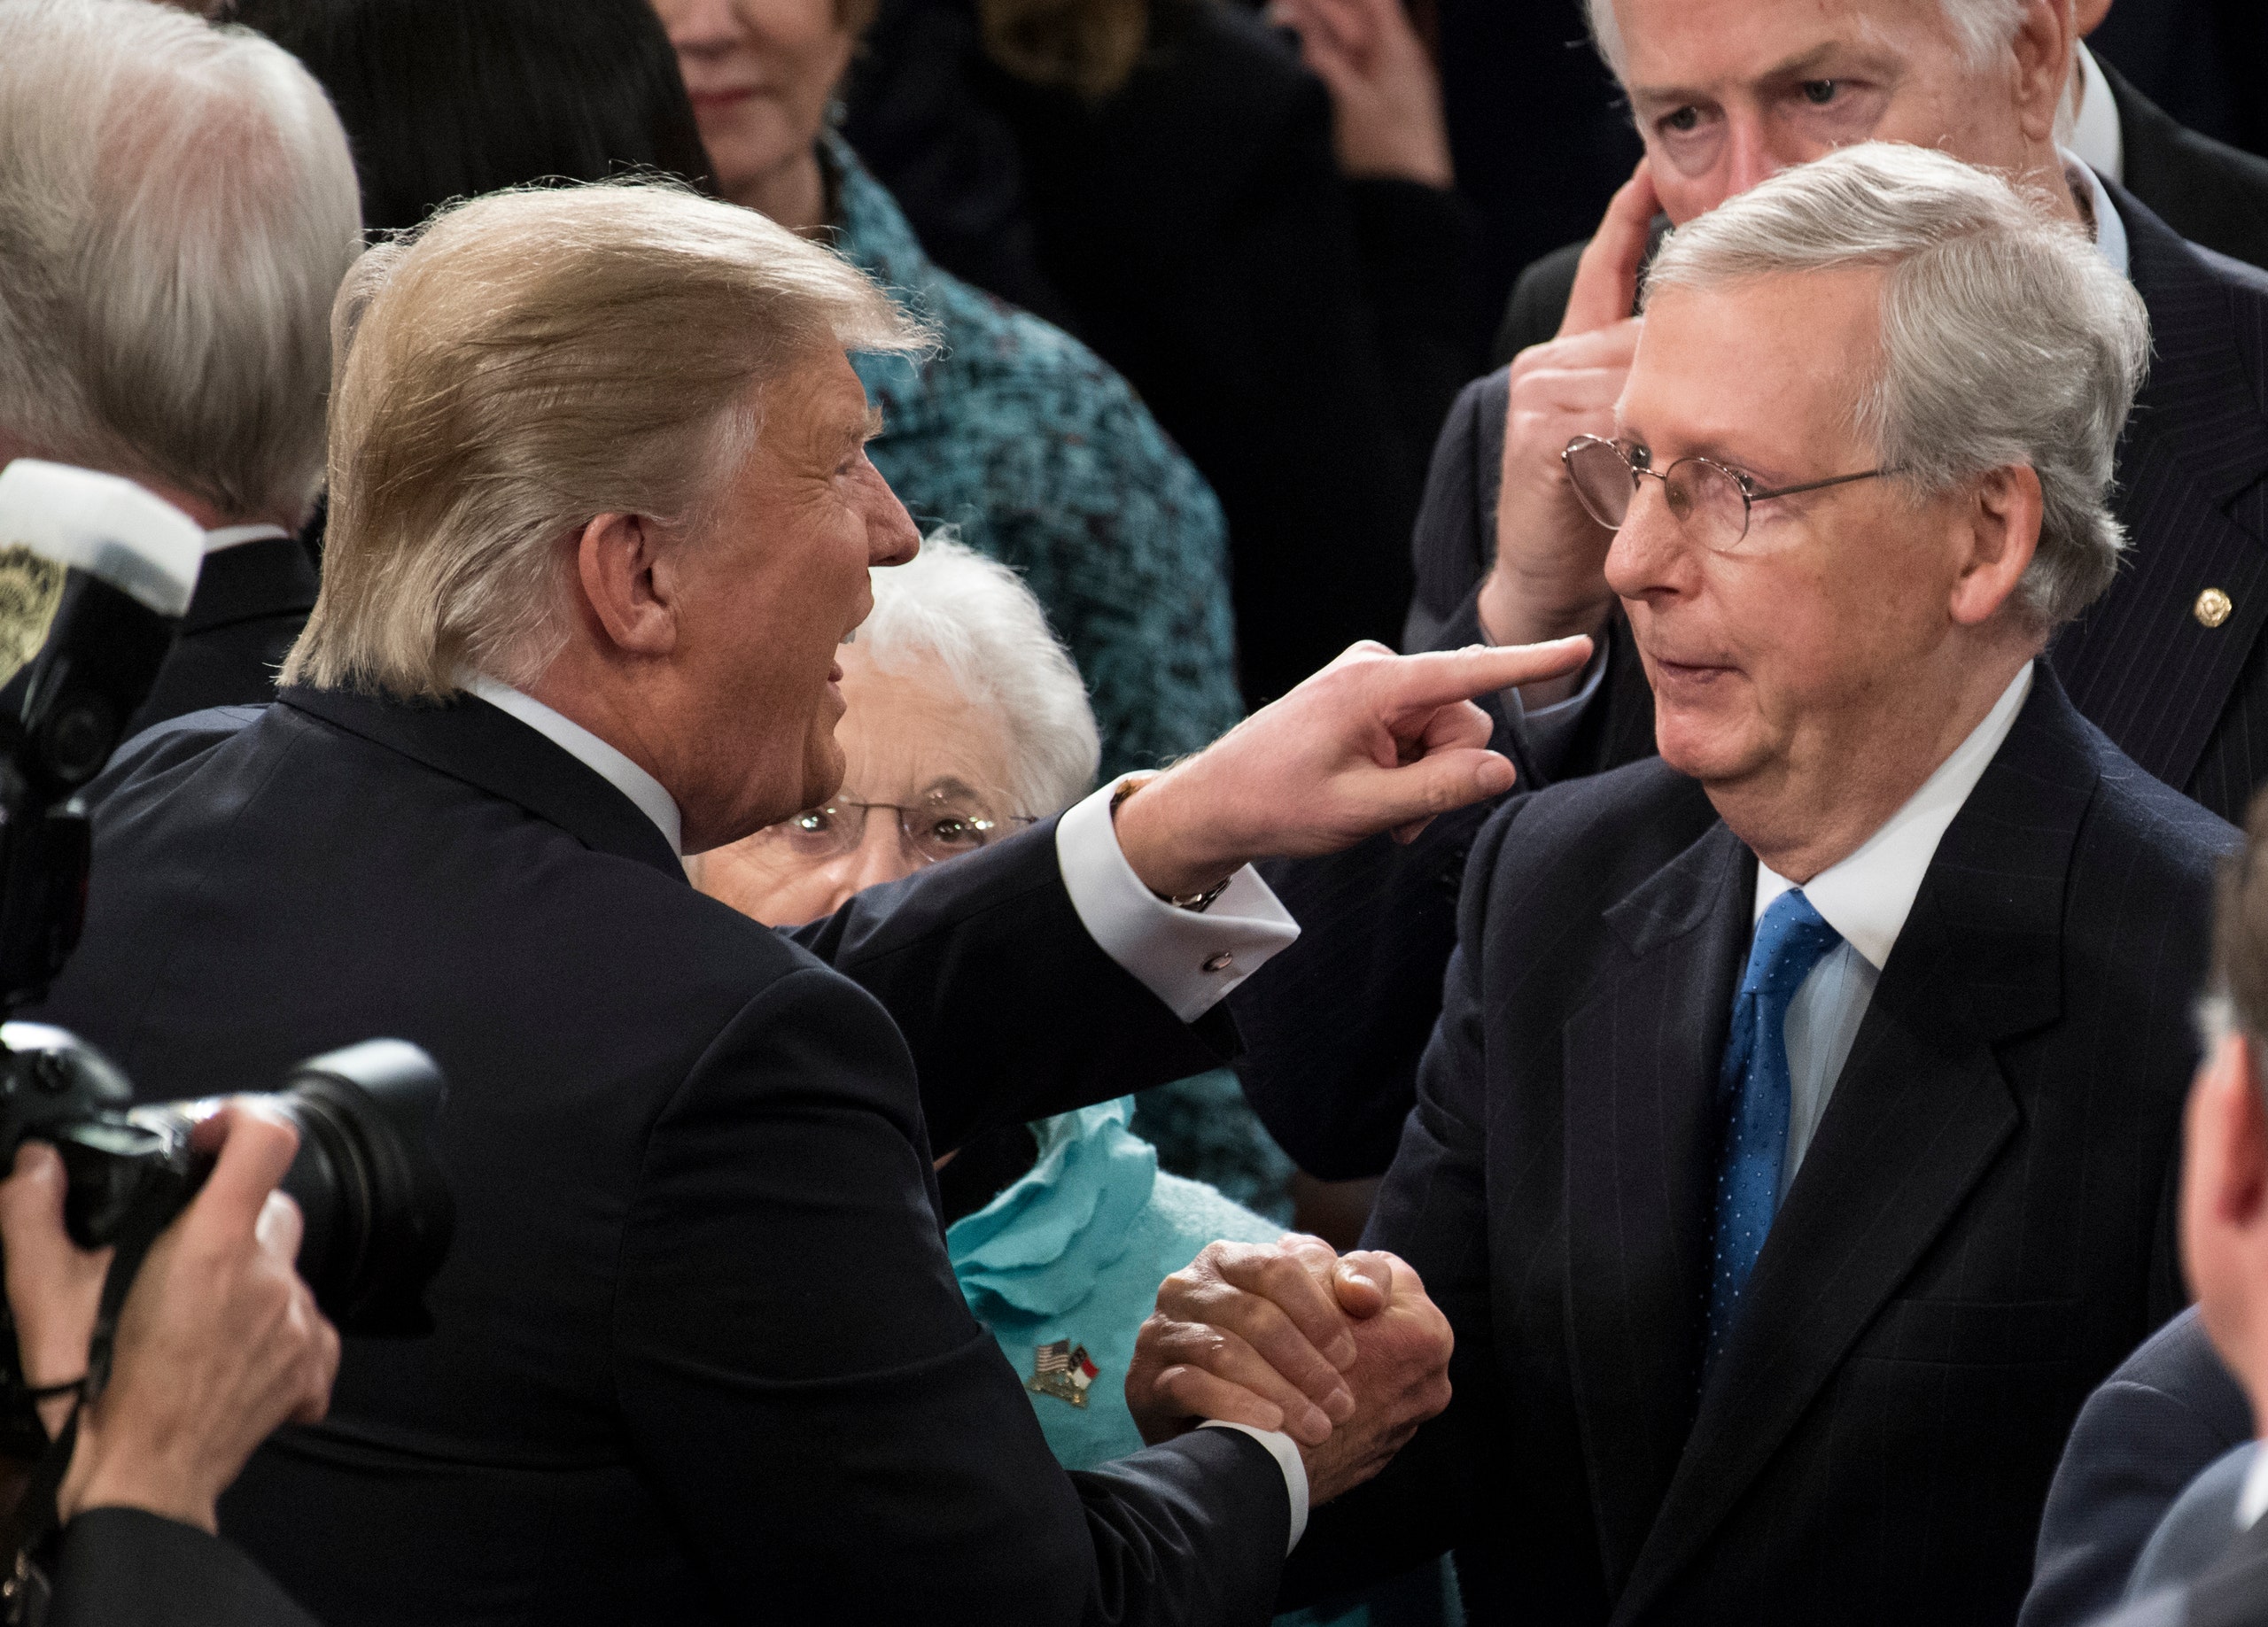 Donald Trump points at Mitch McConnell